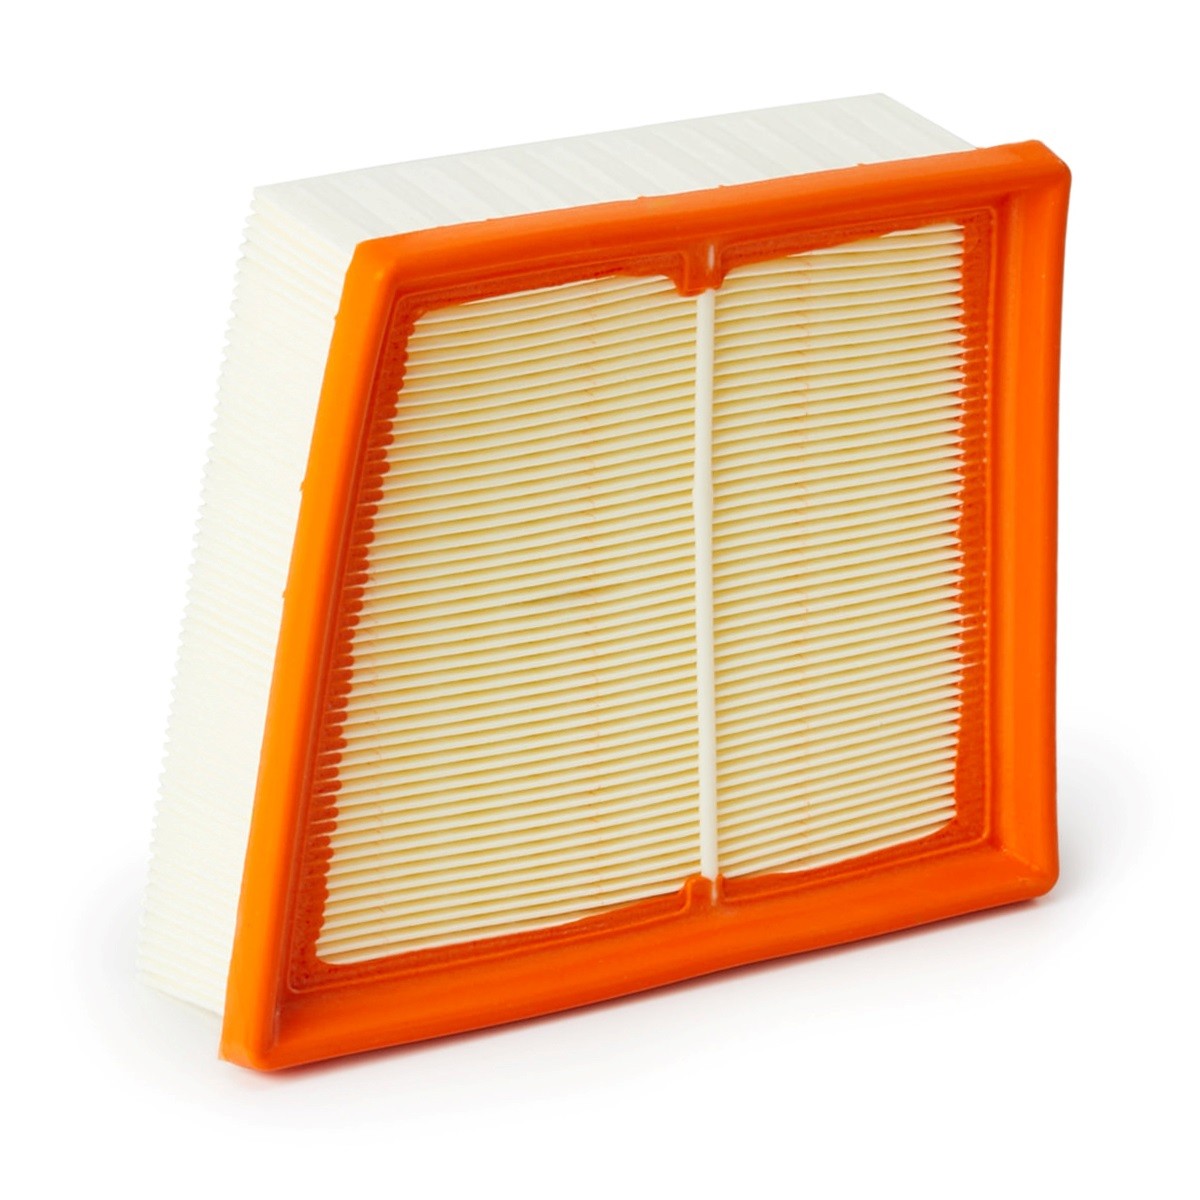 Buy MAHLE ORIGINAL Air Filter LX 2633 for MERCEDES-BENZ at a moderate price